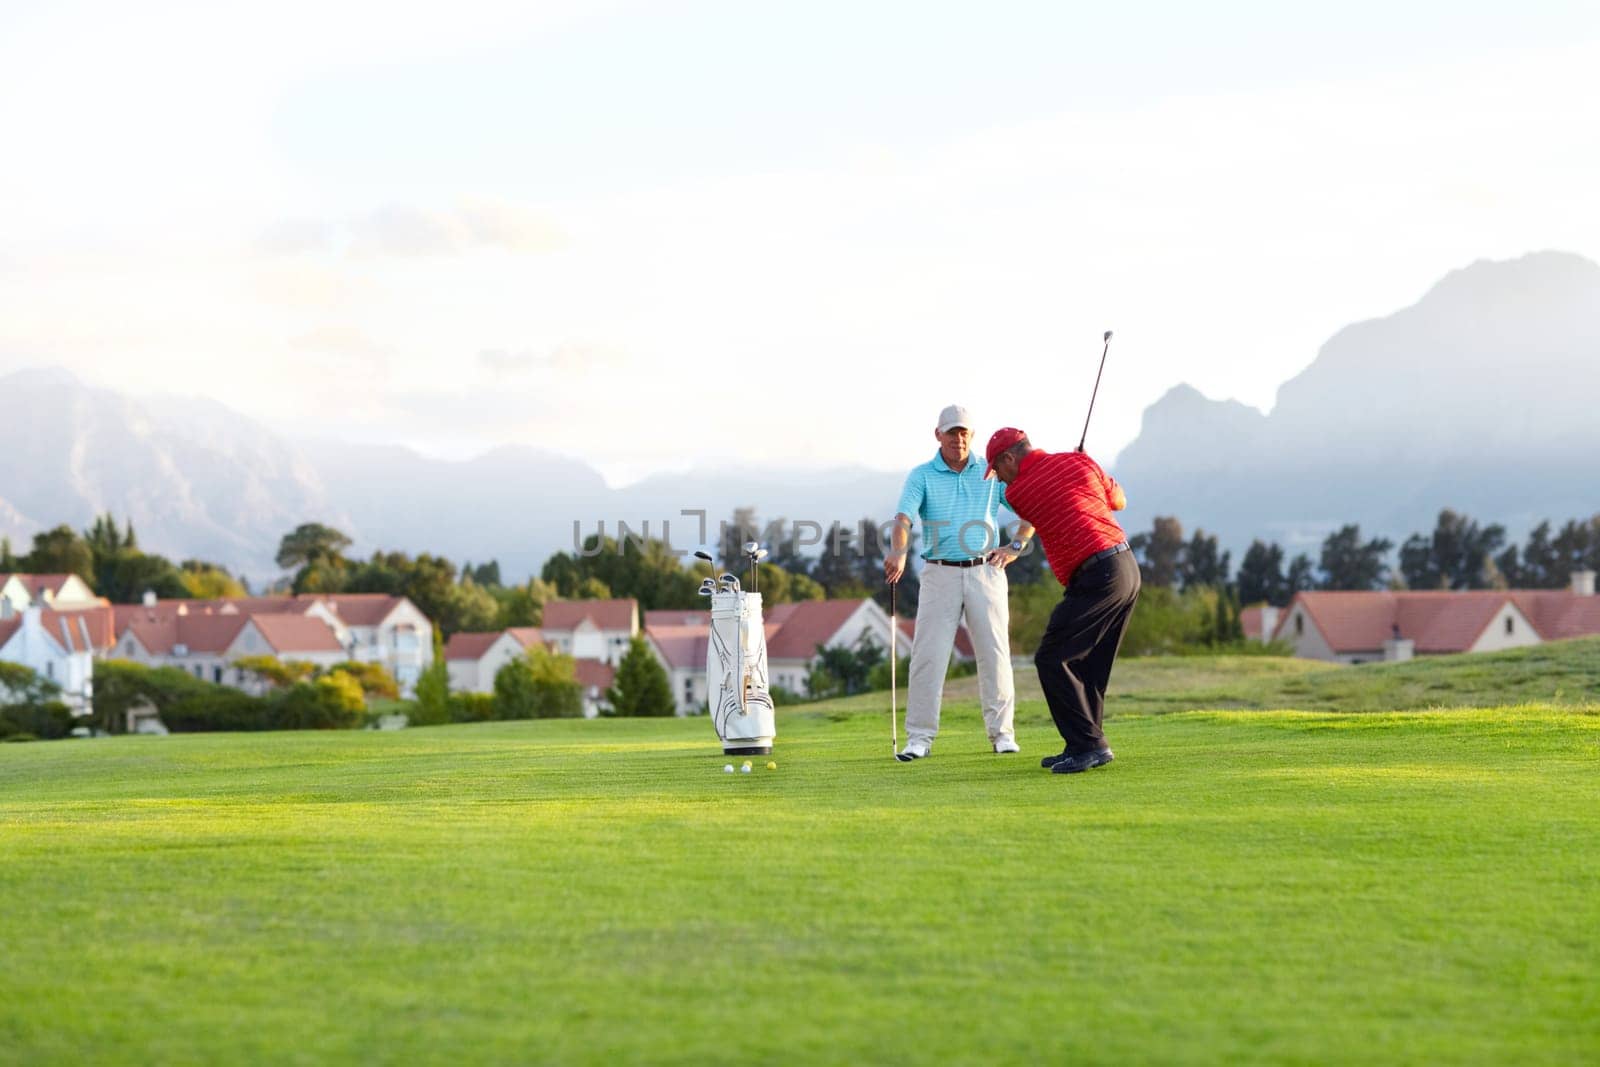 Golf course, stroke and training on the course, field or men in professional, golfer sports club and exercise on the grass. Friends, businessman or healthy game or competition on the green turf.